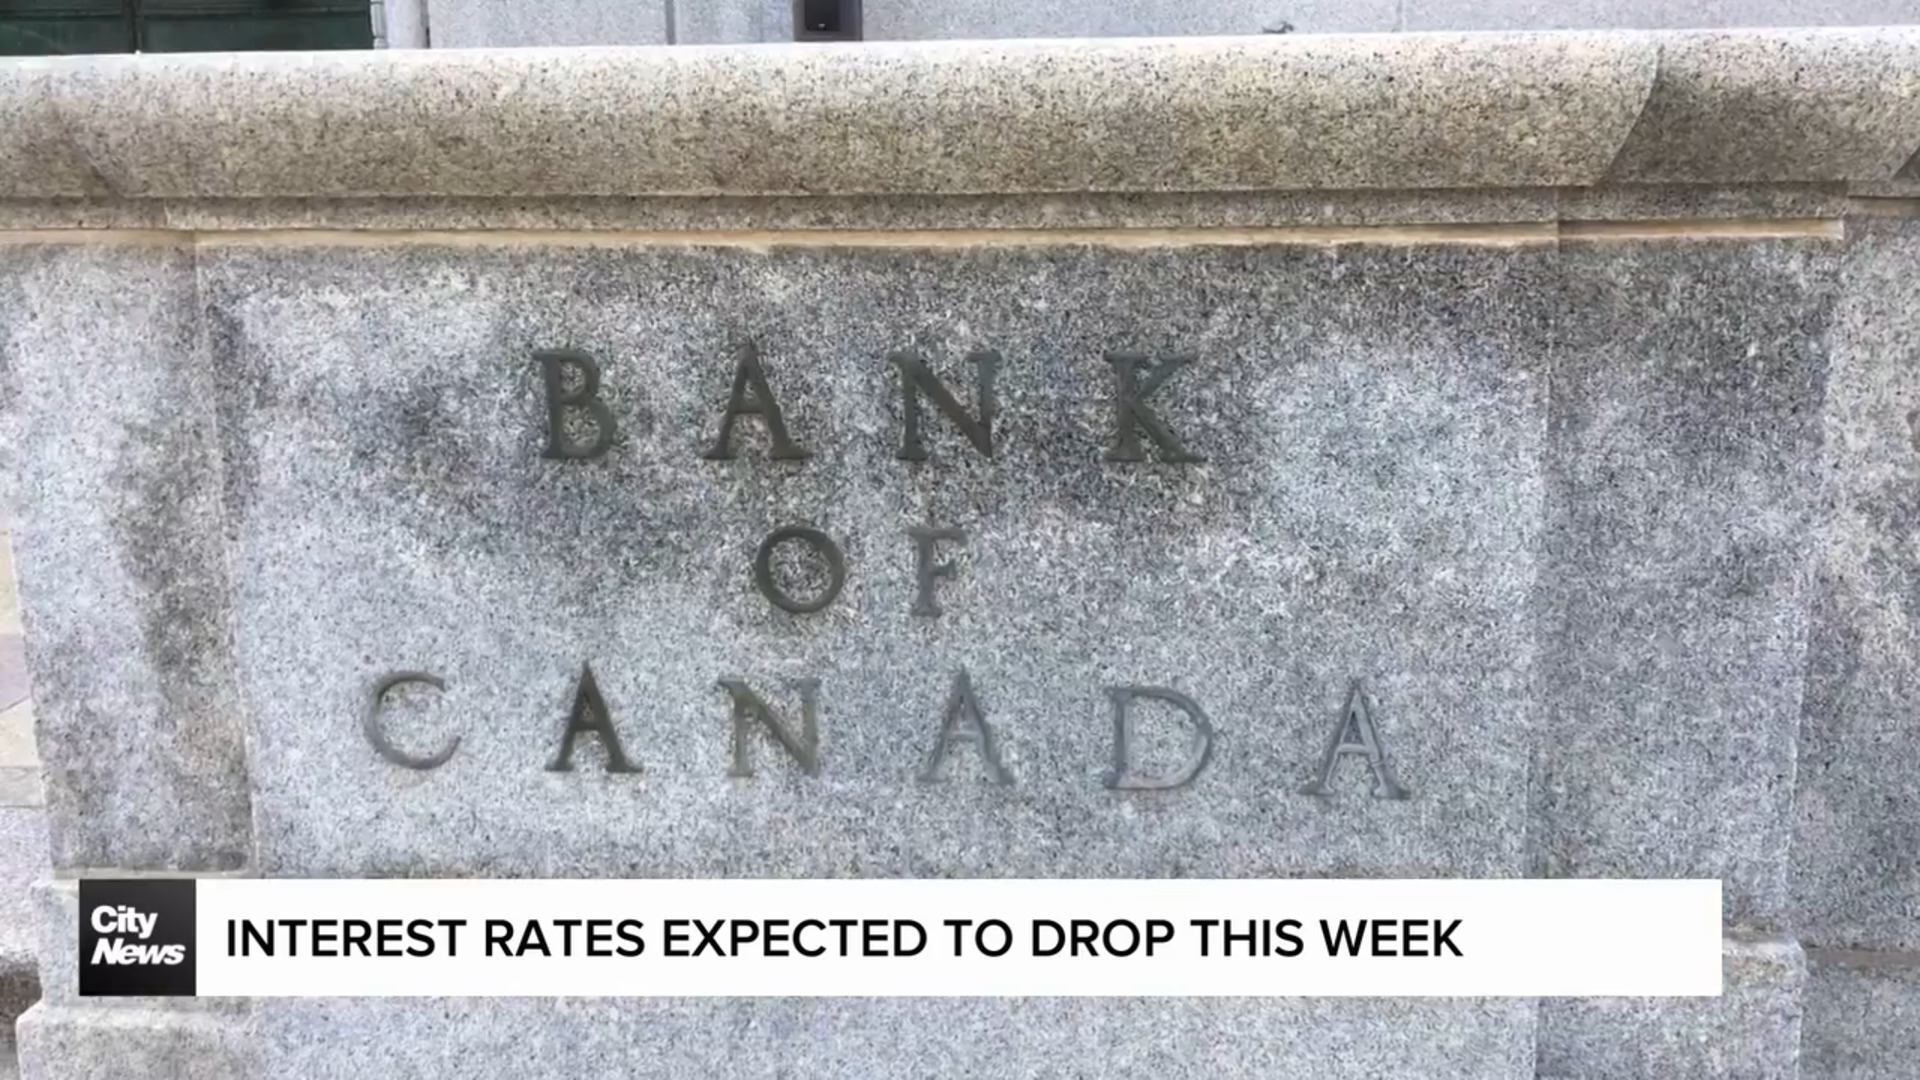 Business Report: Some believe interest rates will drop this week